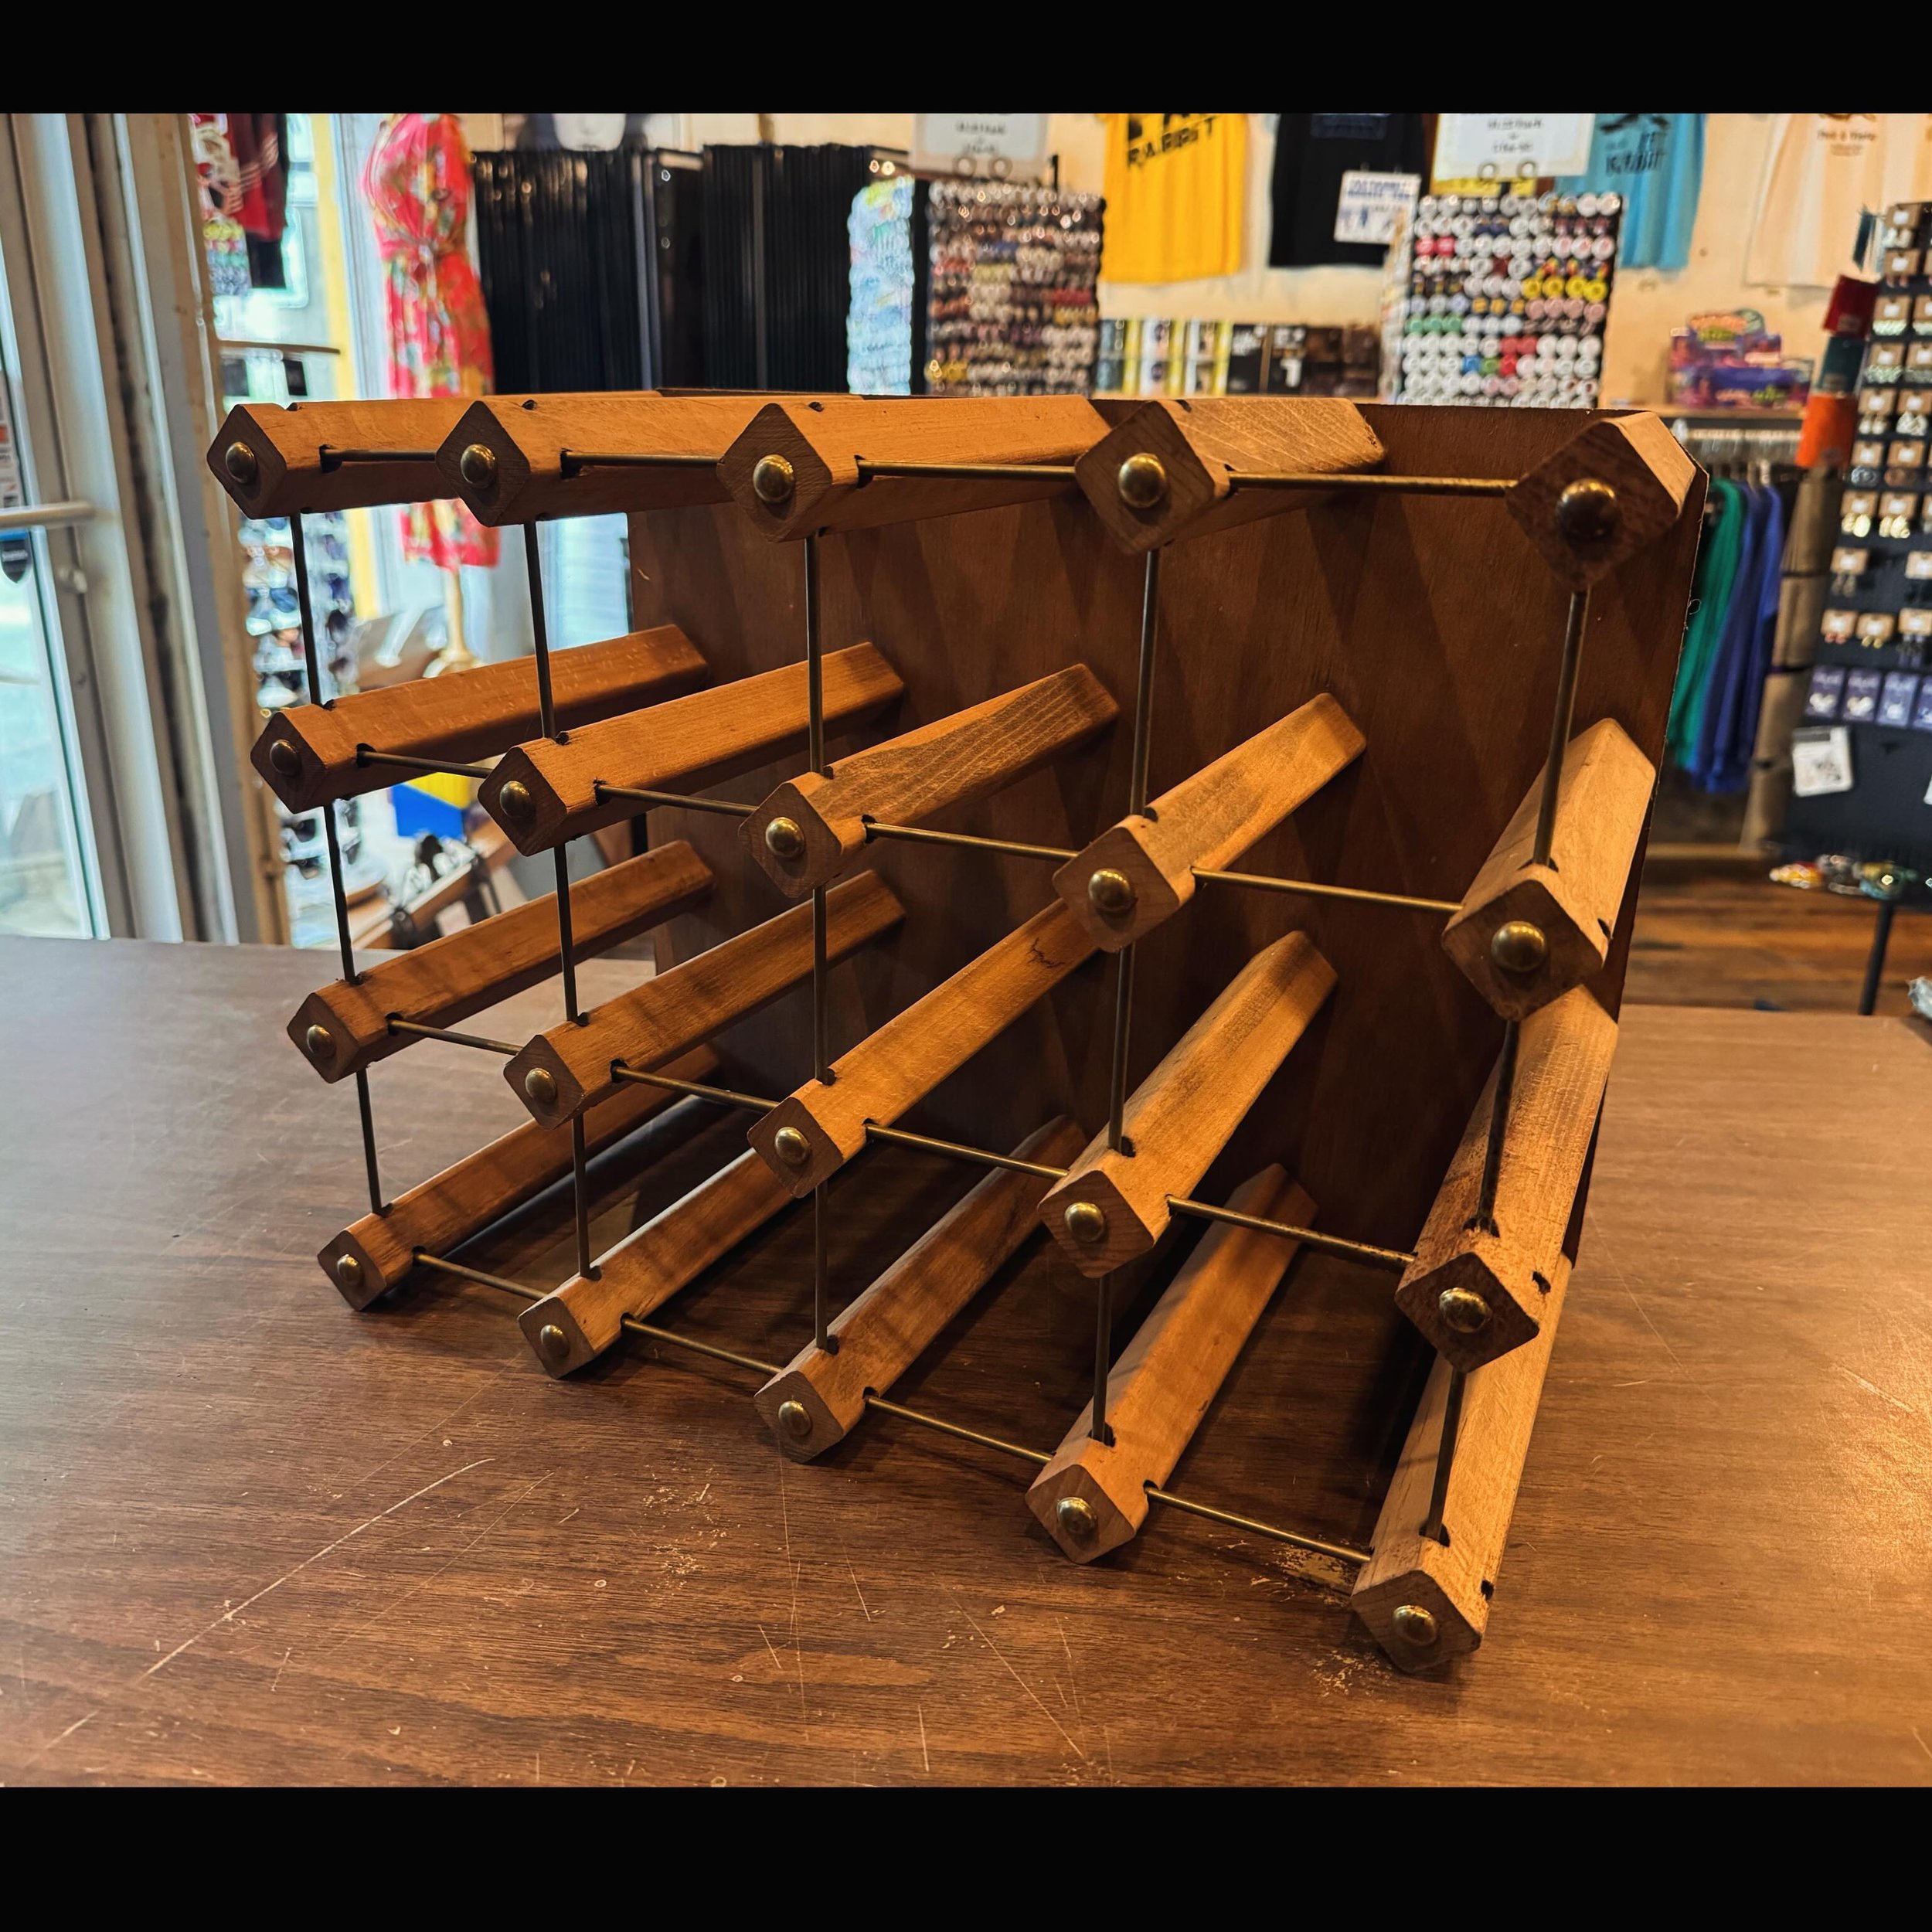 Excellent Mid-Century wine bottle rack! Wood and metal. Great shape. $25
#mcm #winerack #fatrabbitky